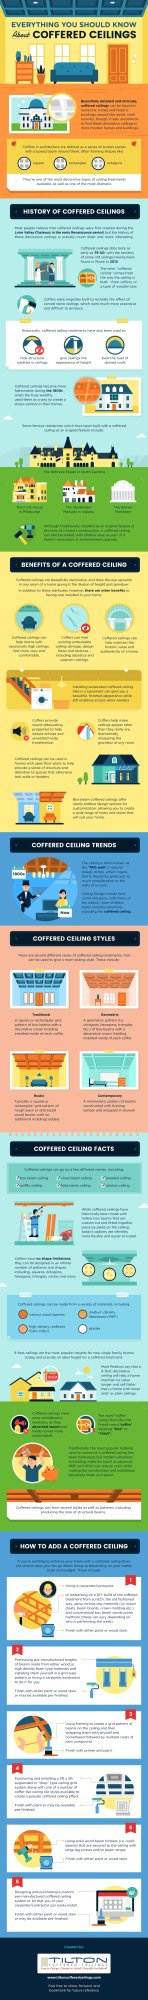 Coffered Ceilings Infographic